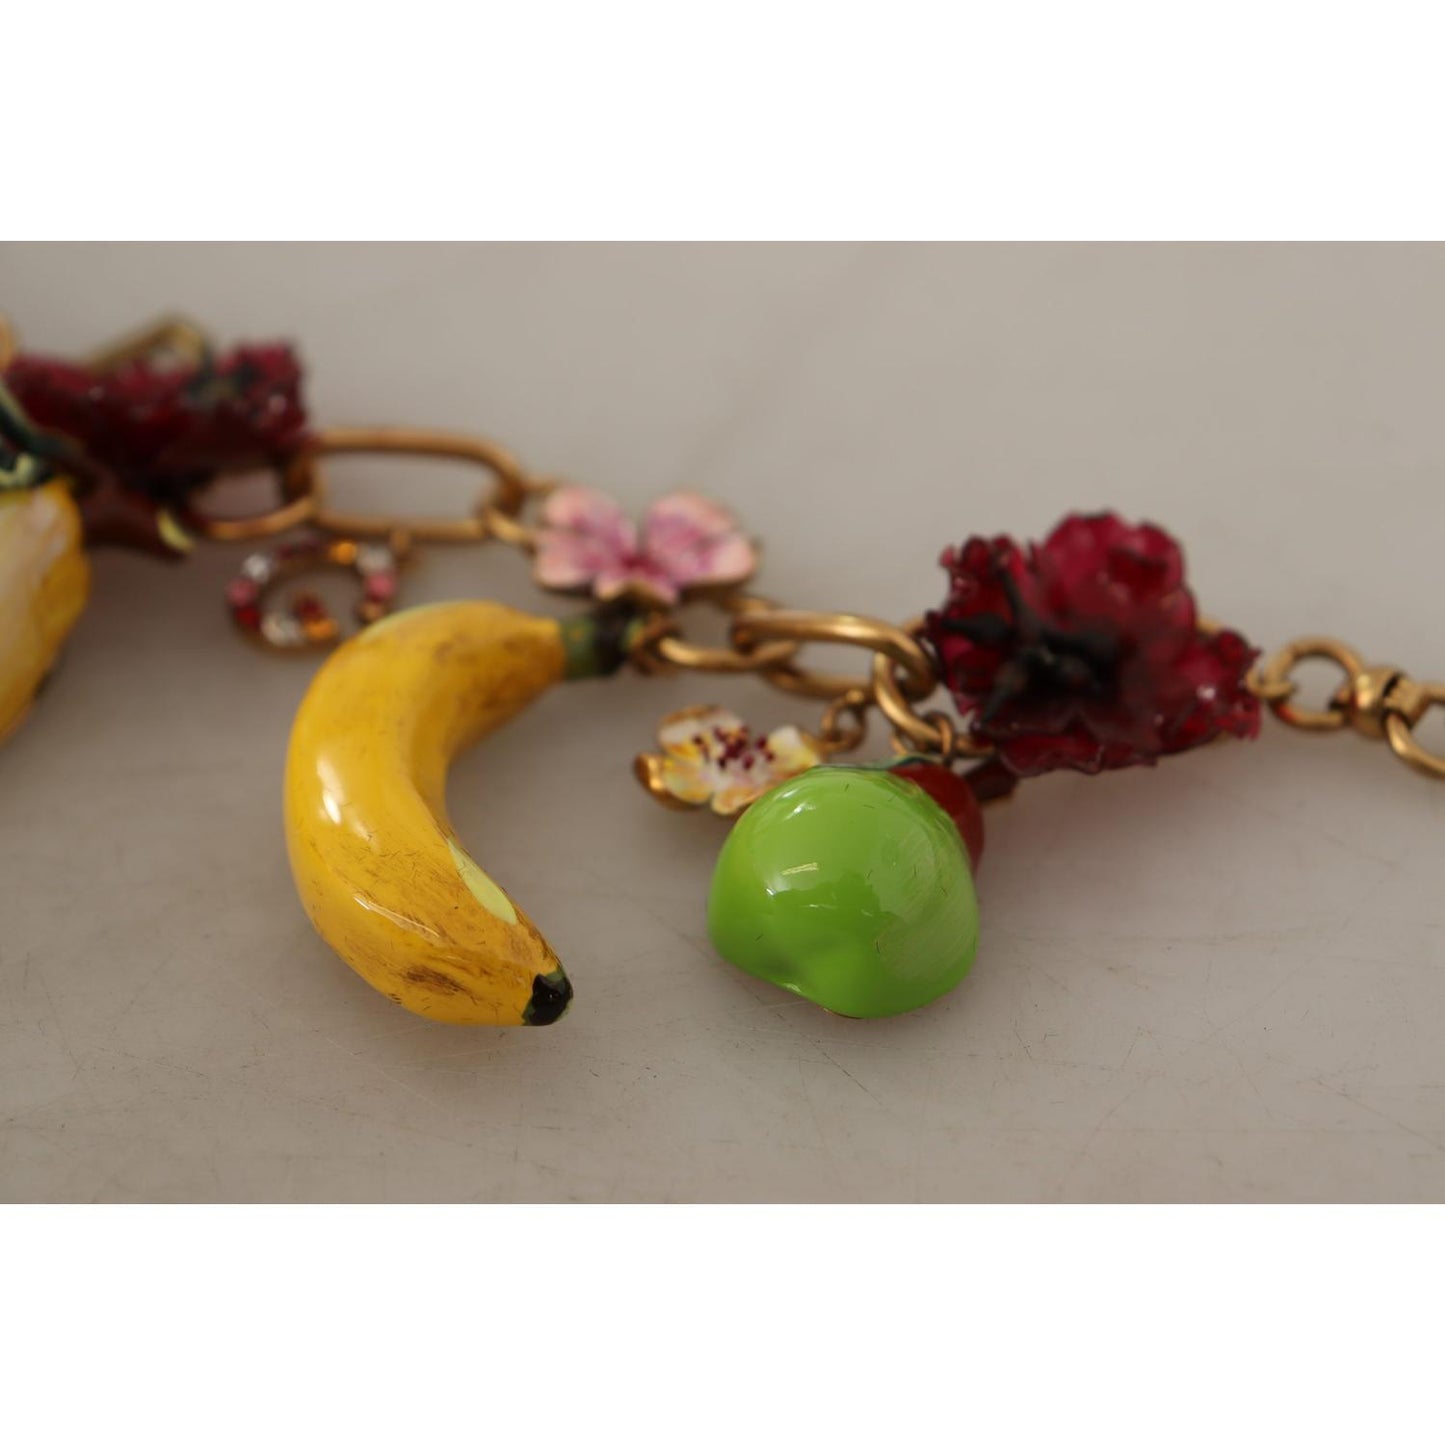 Dolce & Gabbana Chic Gold Statement Sicily Fruit Necklace WOMAN NECKLACE gold-brass-sicily-fruits-roses-statement-necklace